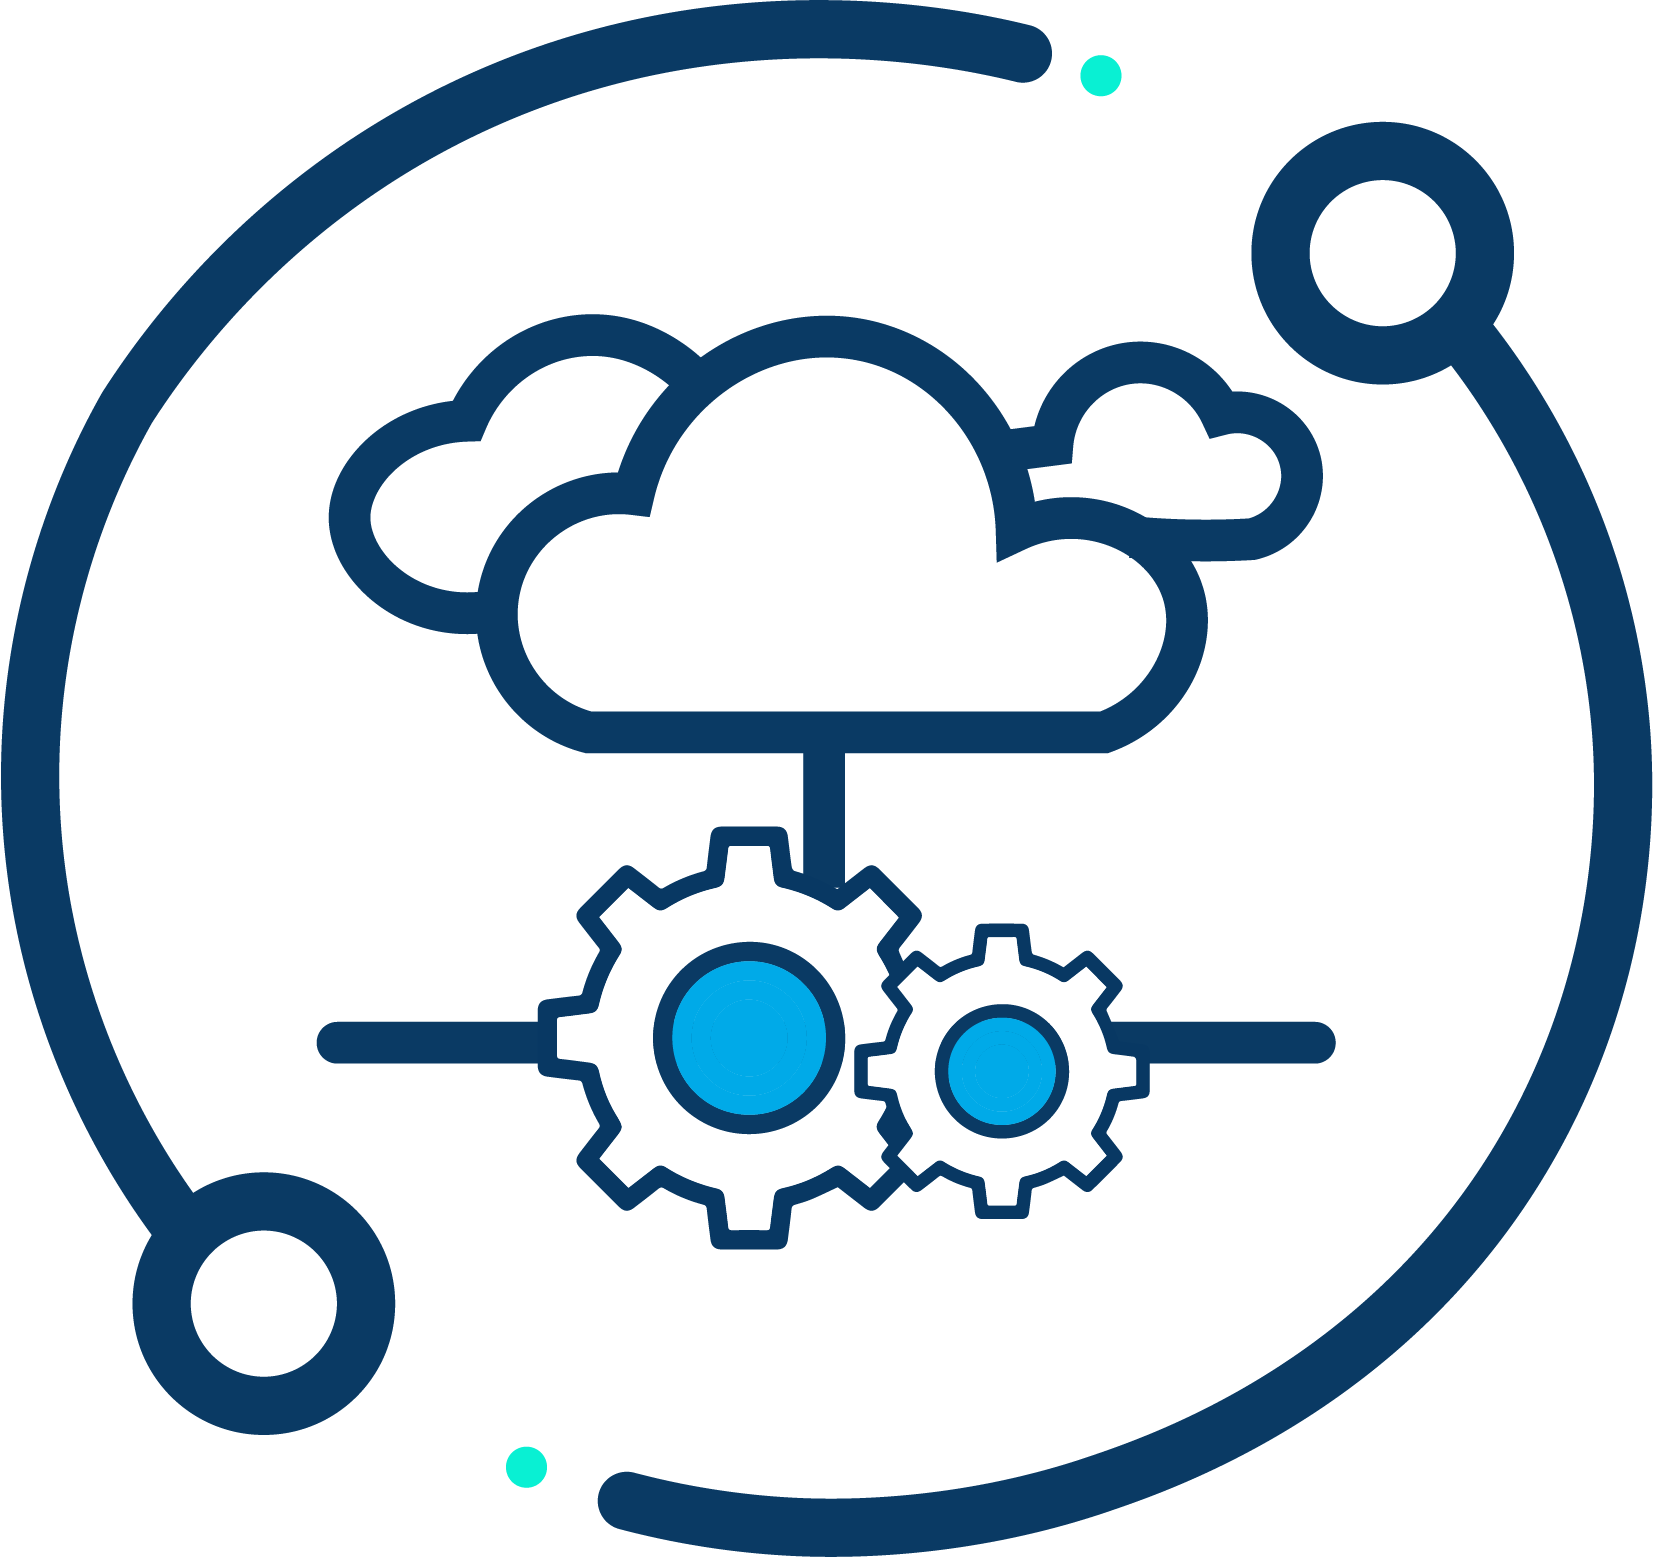 abstract icon for cloud services